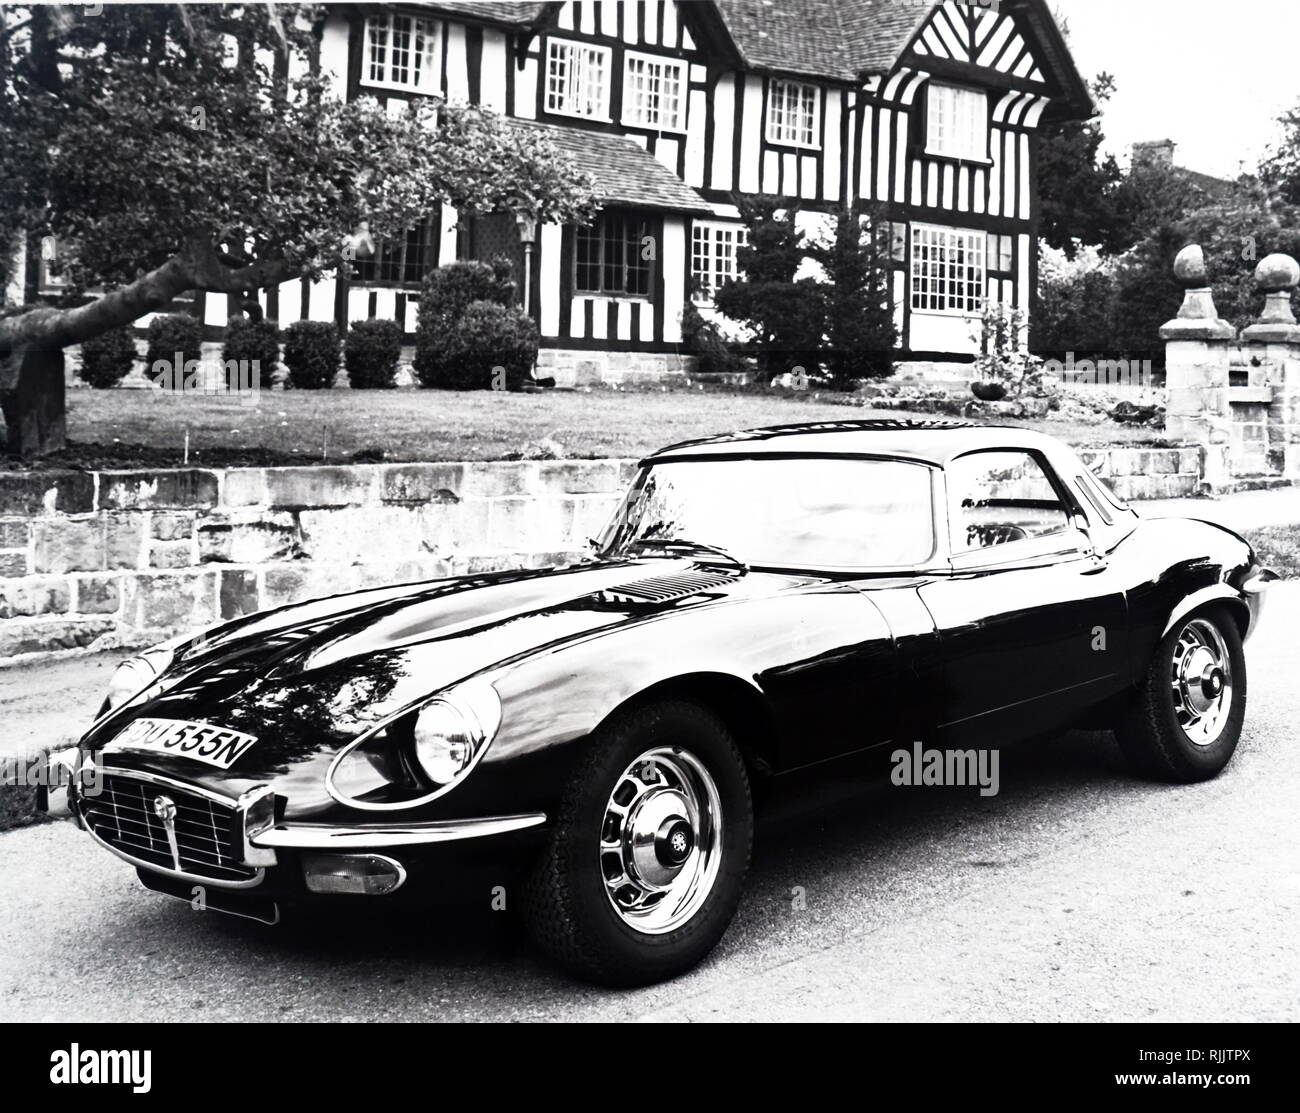 A photograph of a Jaguar E-Type (Jaguar XK-E) Series 3, a British sports car that was manufactured by Jaguar Cars Ltd between 1961 and 1975. Dated 20th century Stock Photo